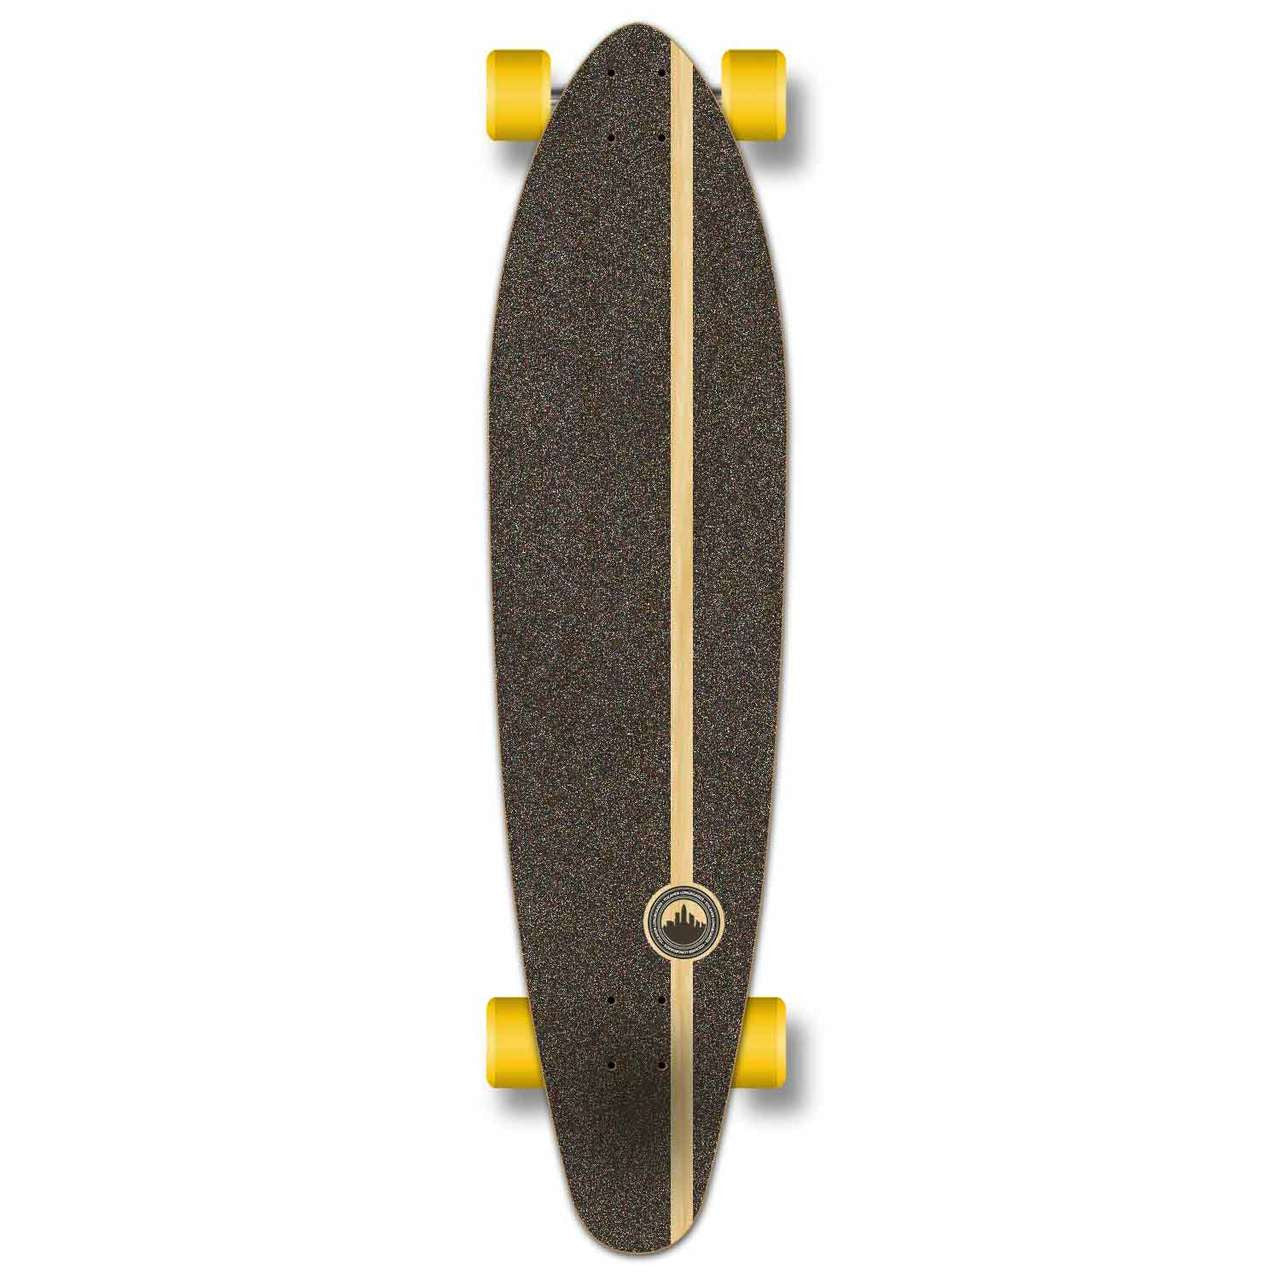 Yocaher Kicktail Longboard Complete - Shades Black